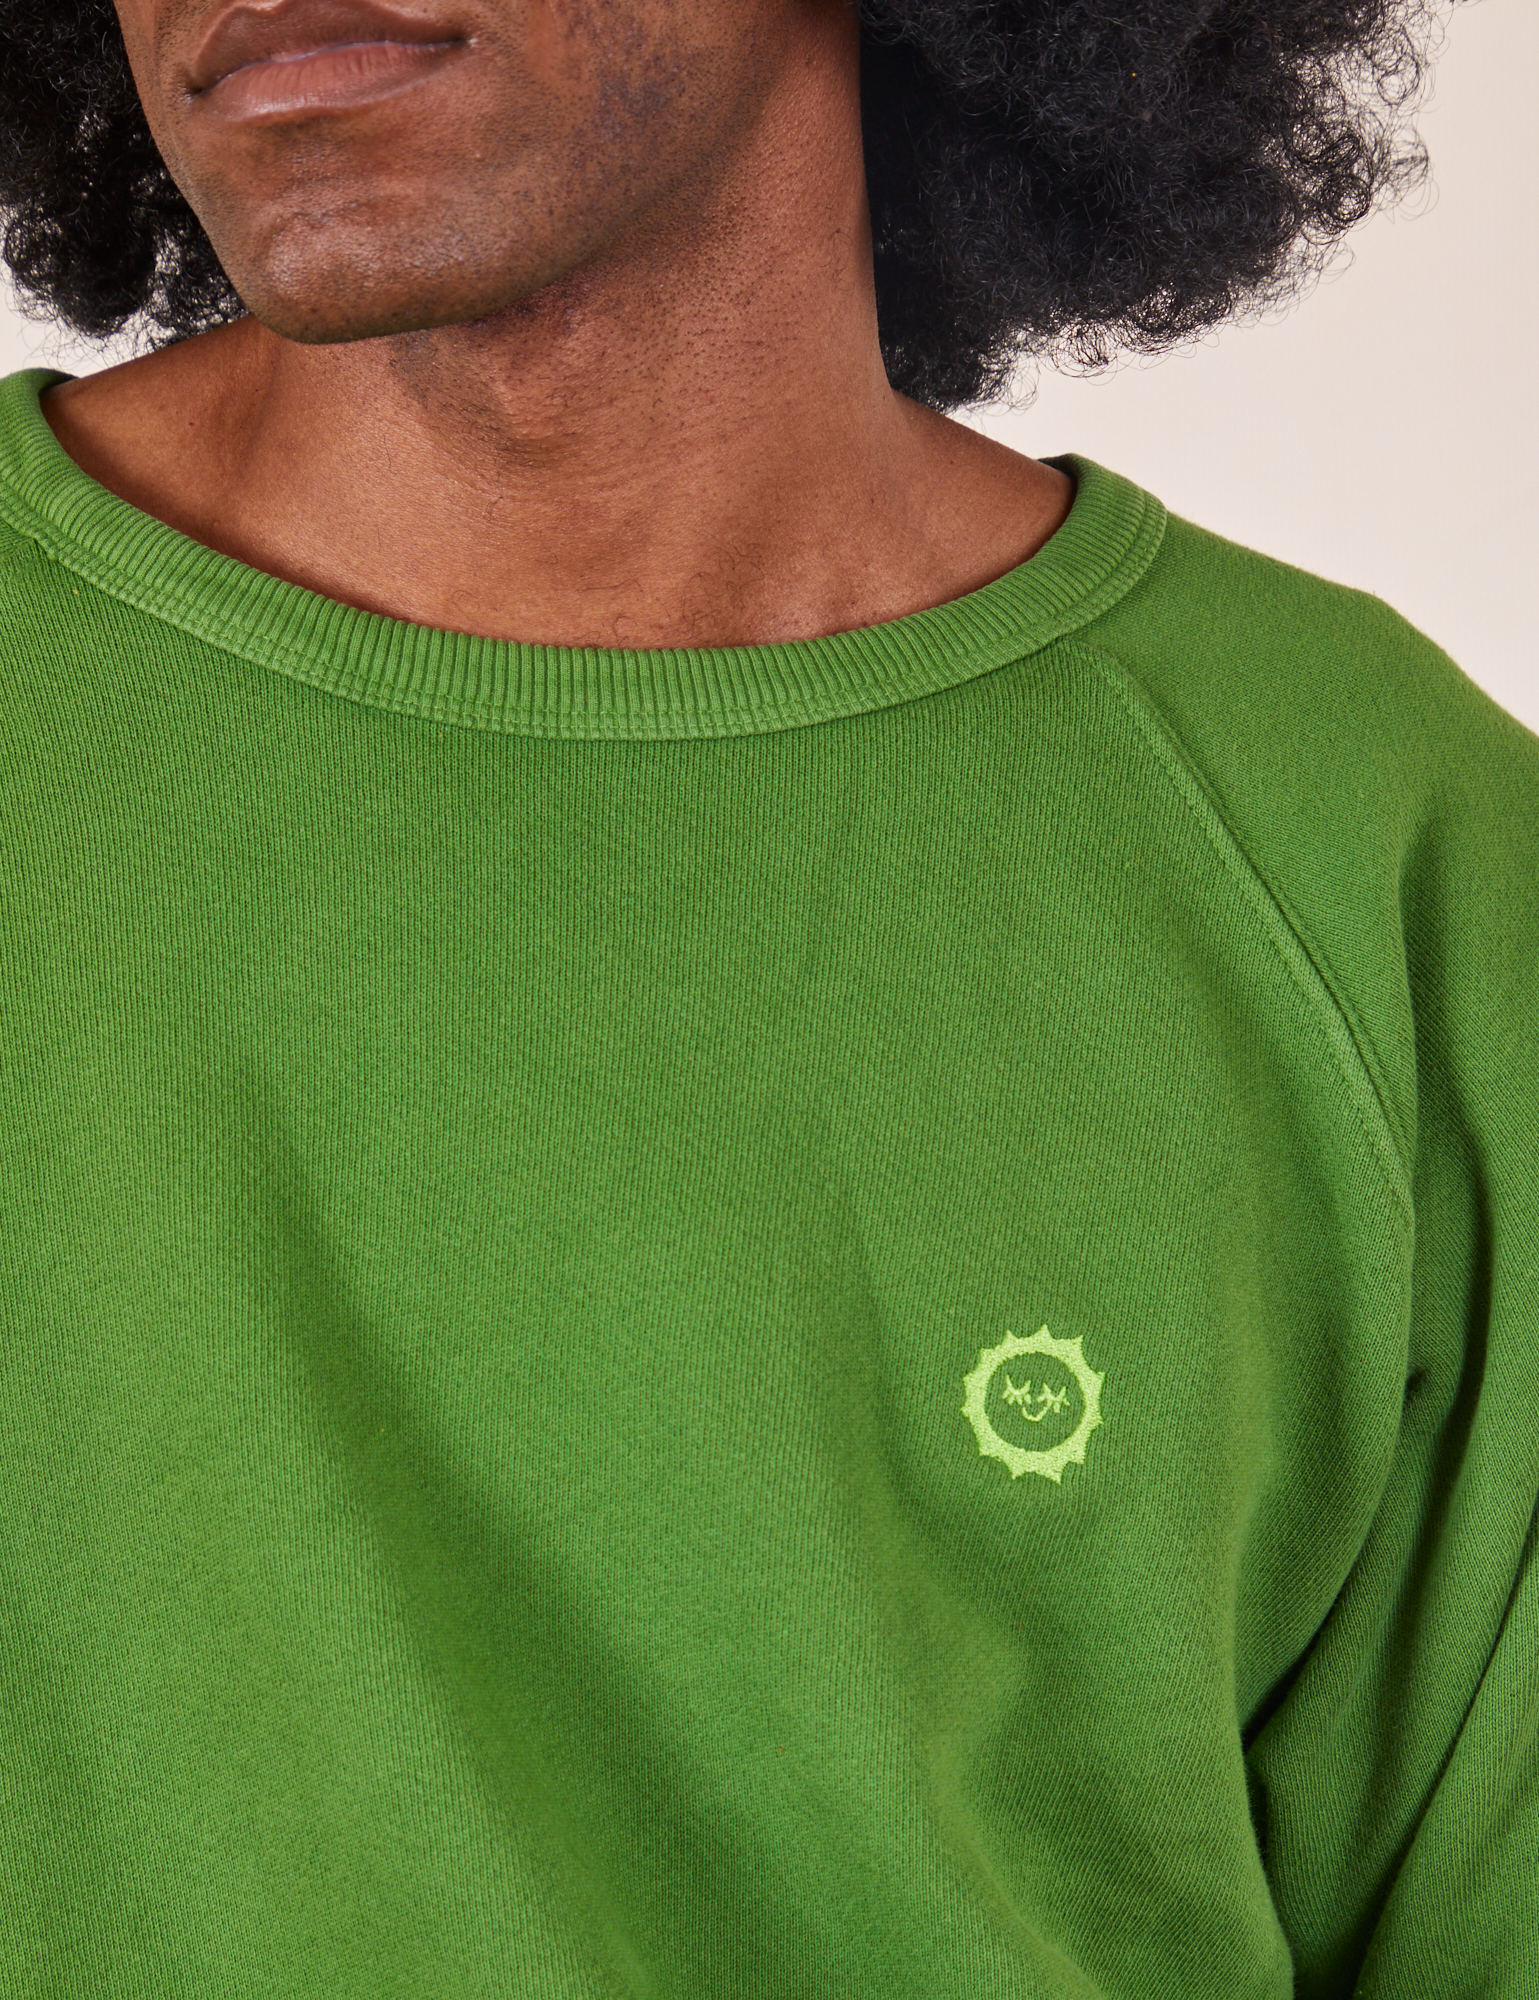 Heavyweight Crew in Lawn Green front close up on Jerrod. Embroidered Sun Baby Logo.